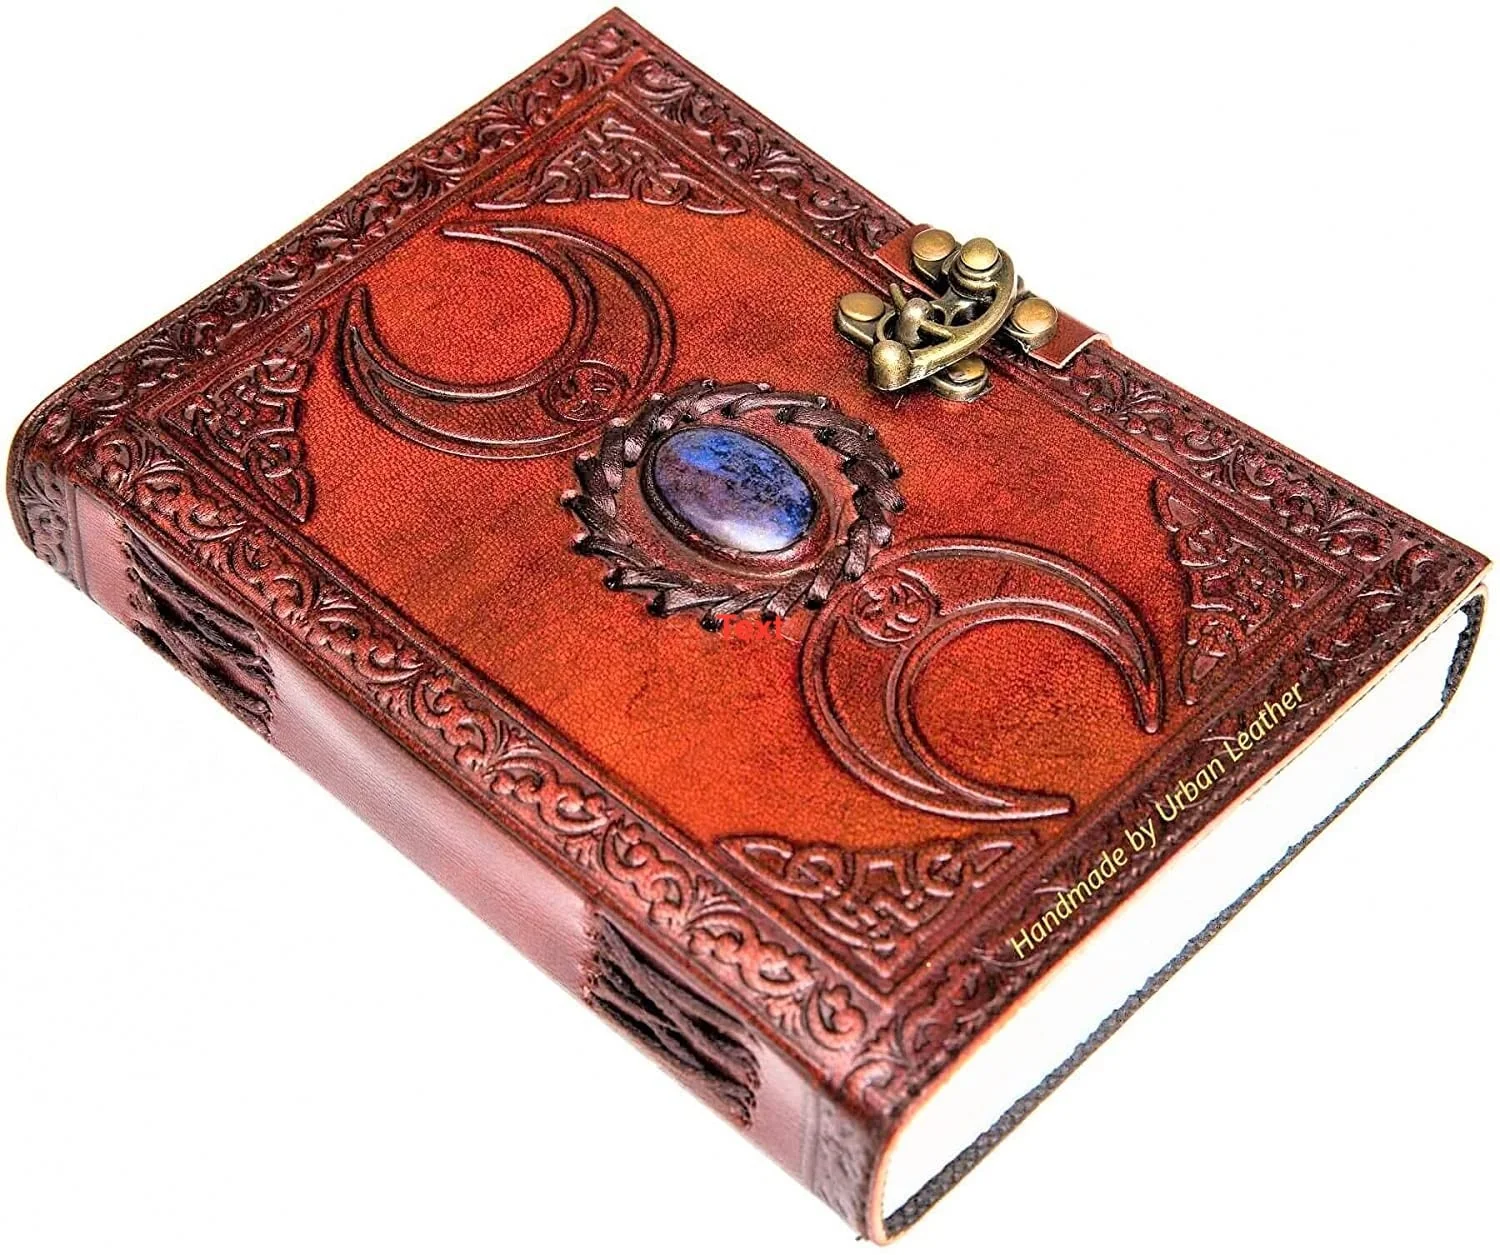 Leather Journal Handmade Black Third Eye Stone Celtic Triple Moon Embossed Vintage Daily Notepad Unlined Paper 7 x 5 Inches Sketchbook & Writing Notebook 